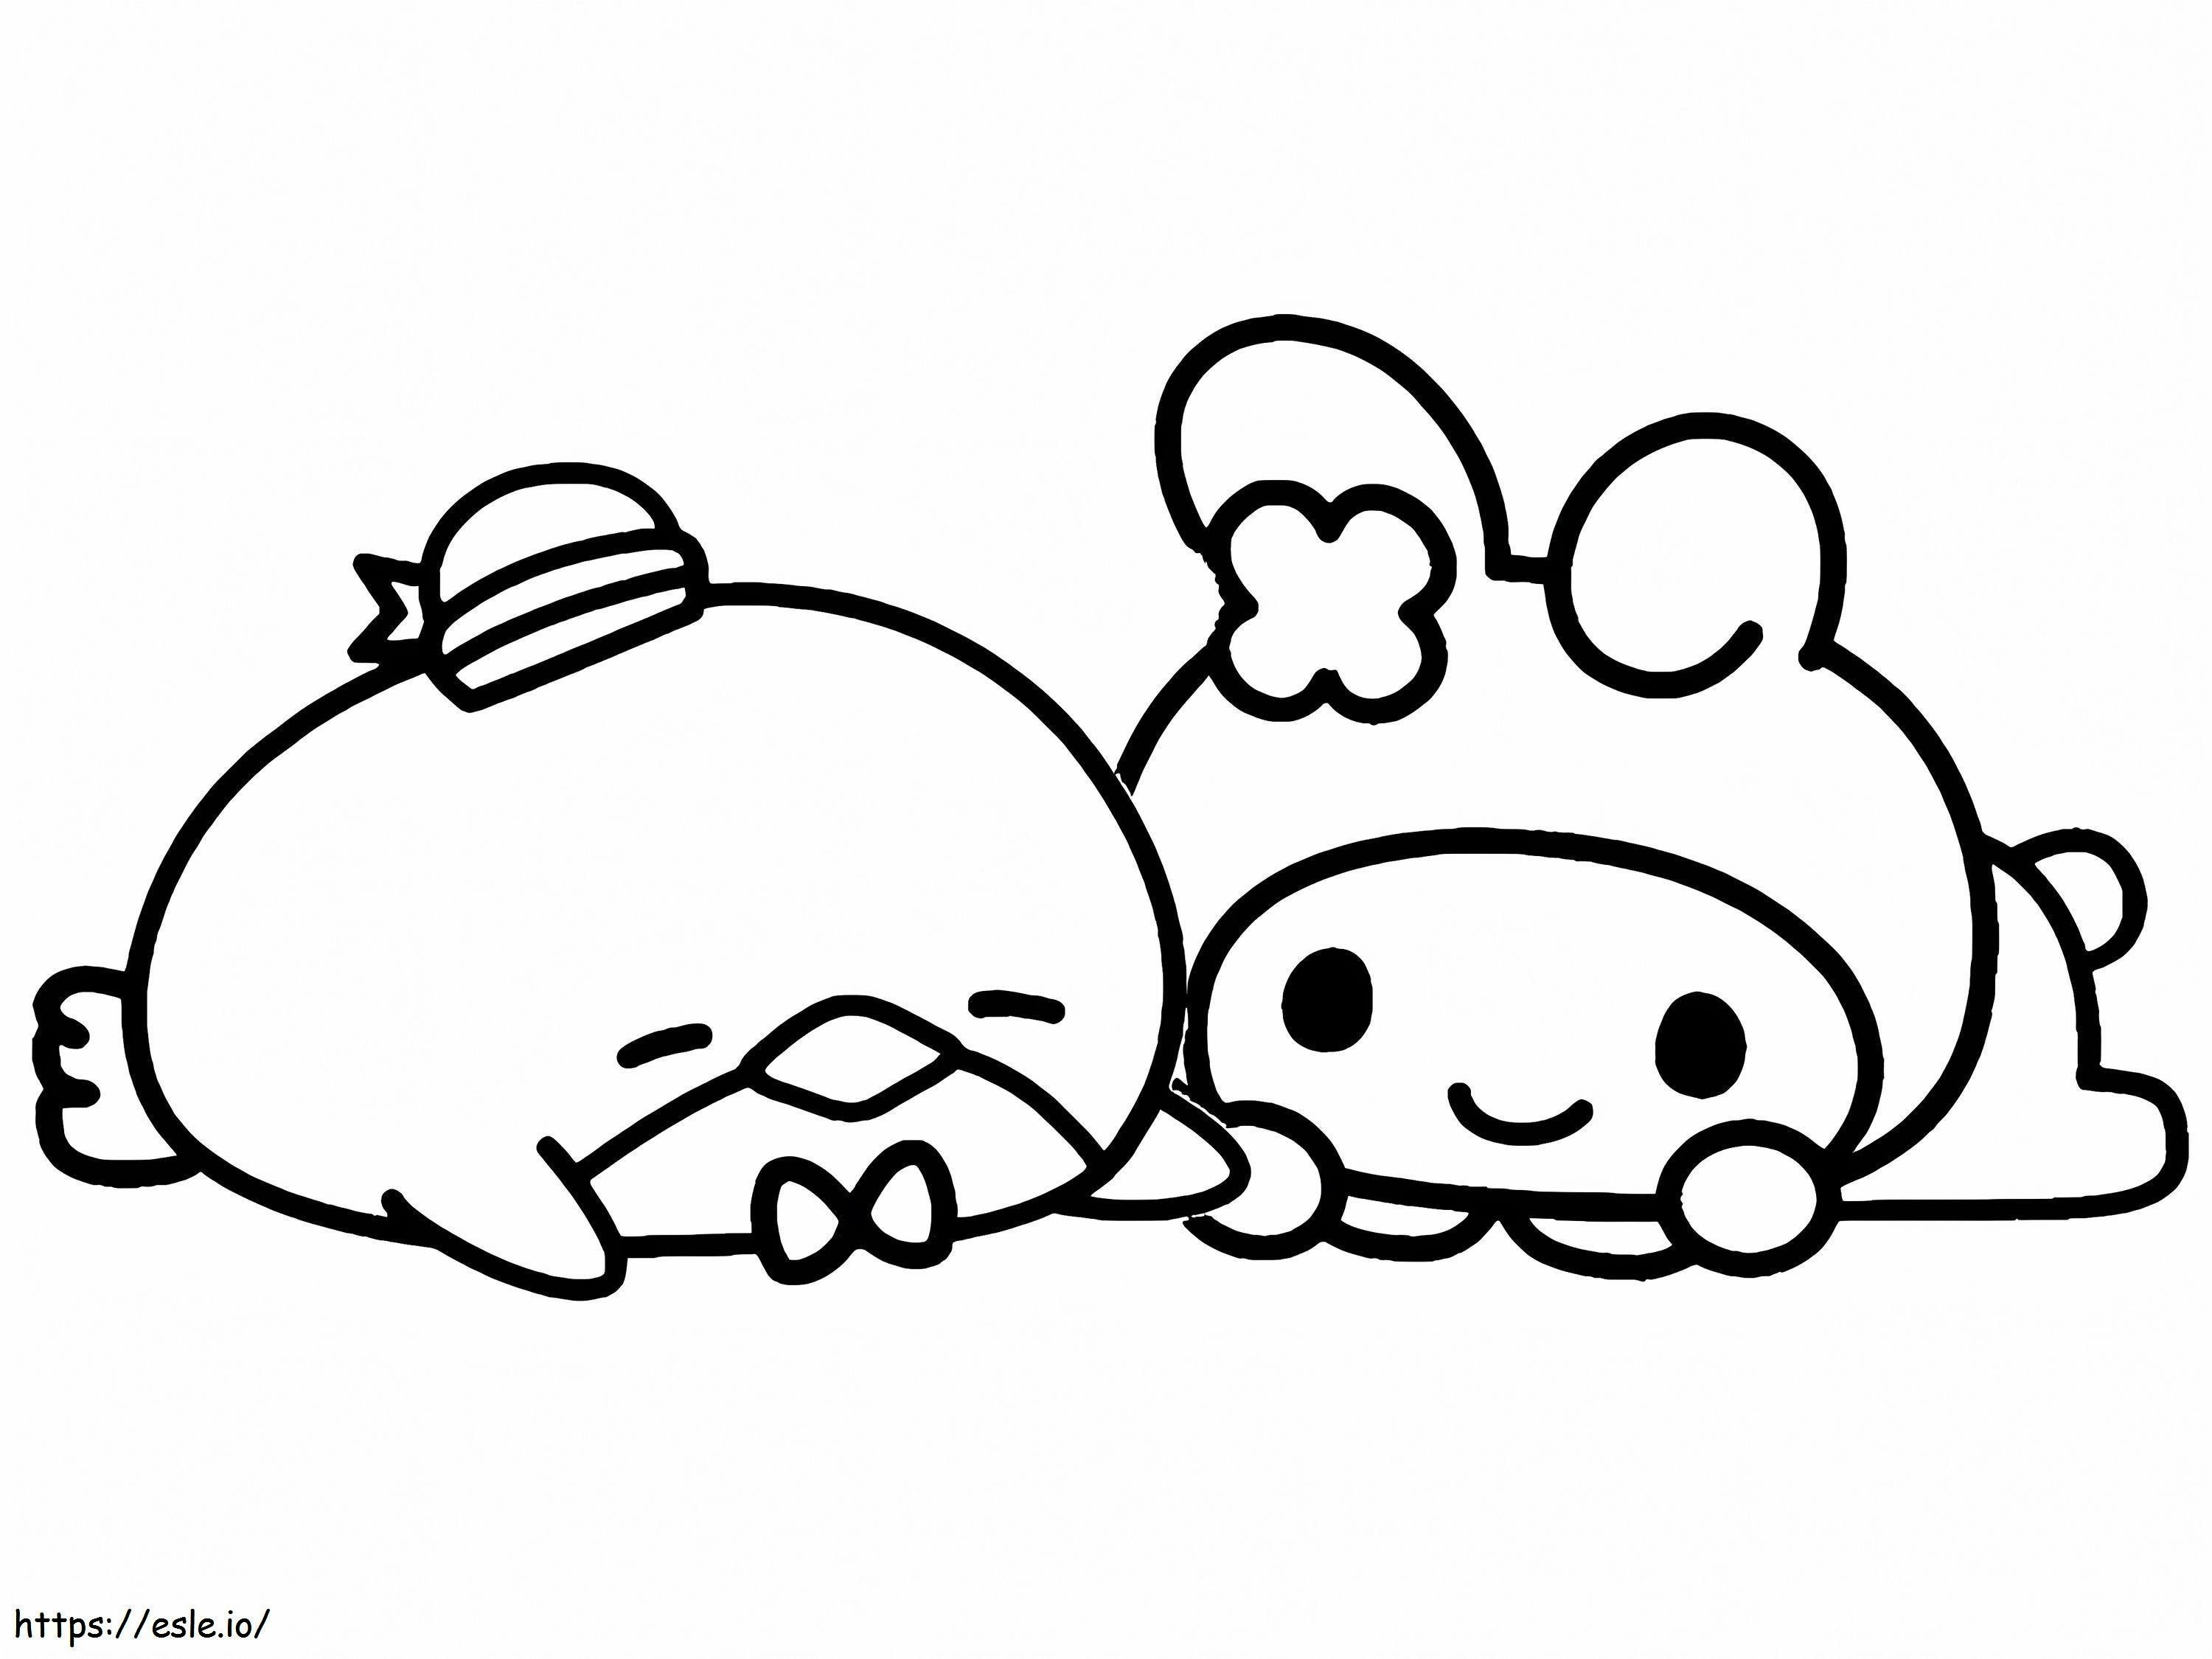 Tuxedo Sam And My Melody coloring page